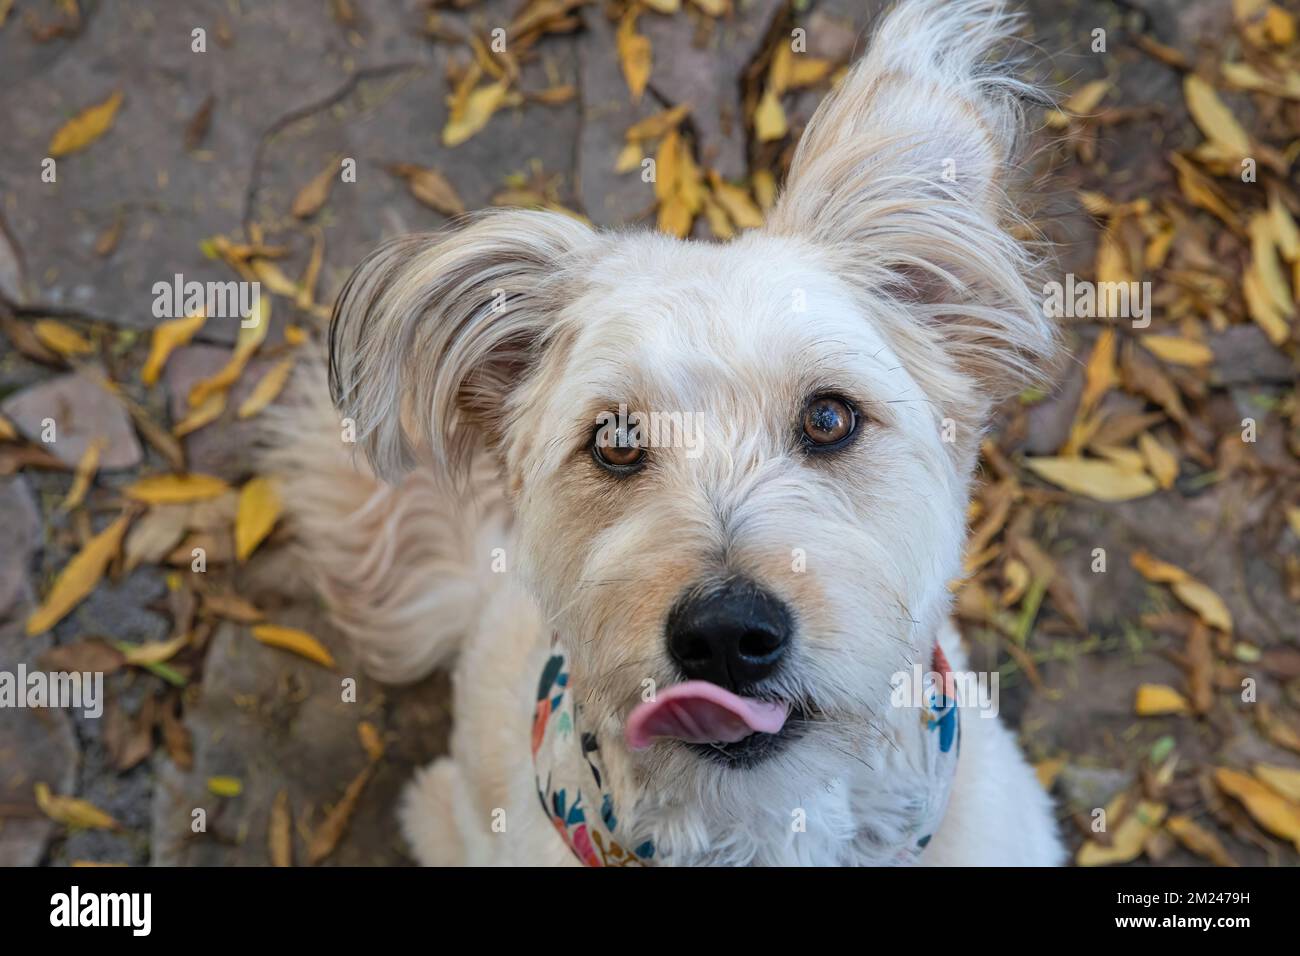 Cute dog, poodle mix, looking at camera with tongue out. Stock Photo